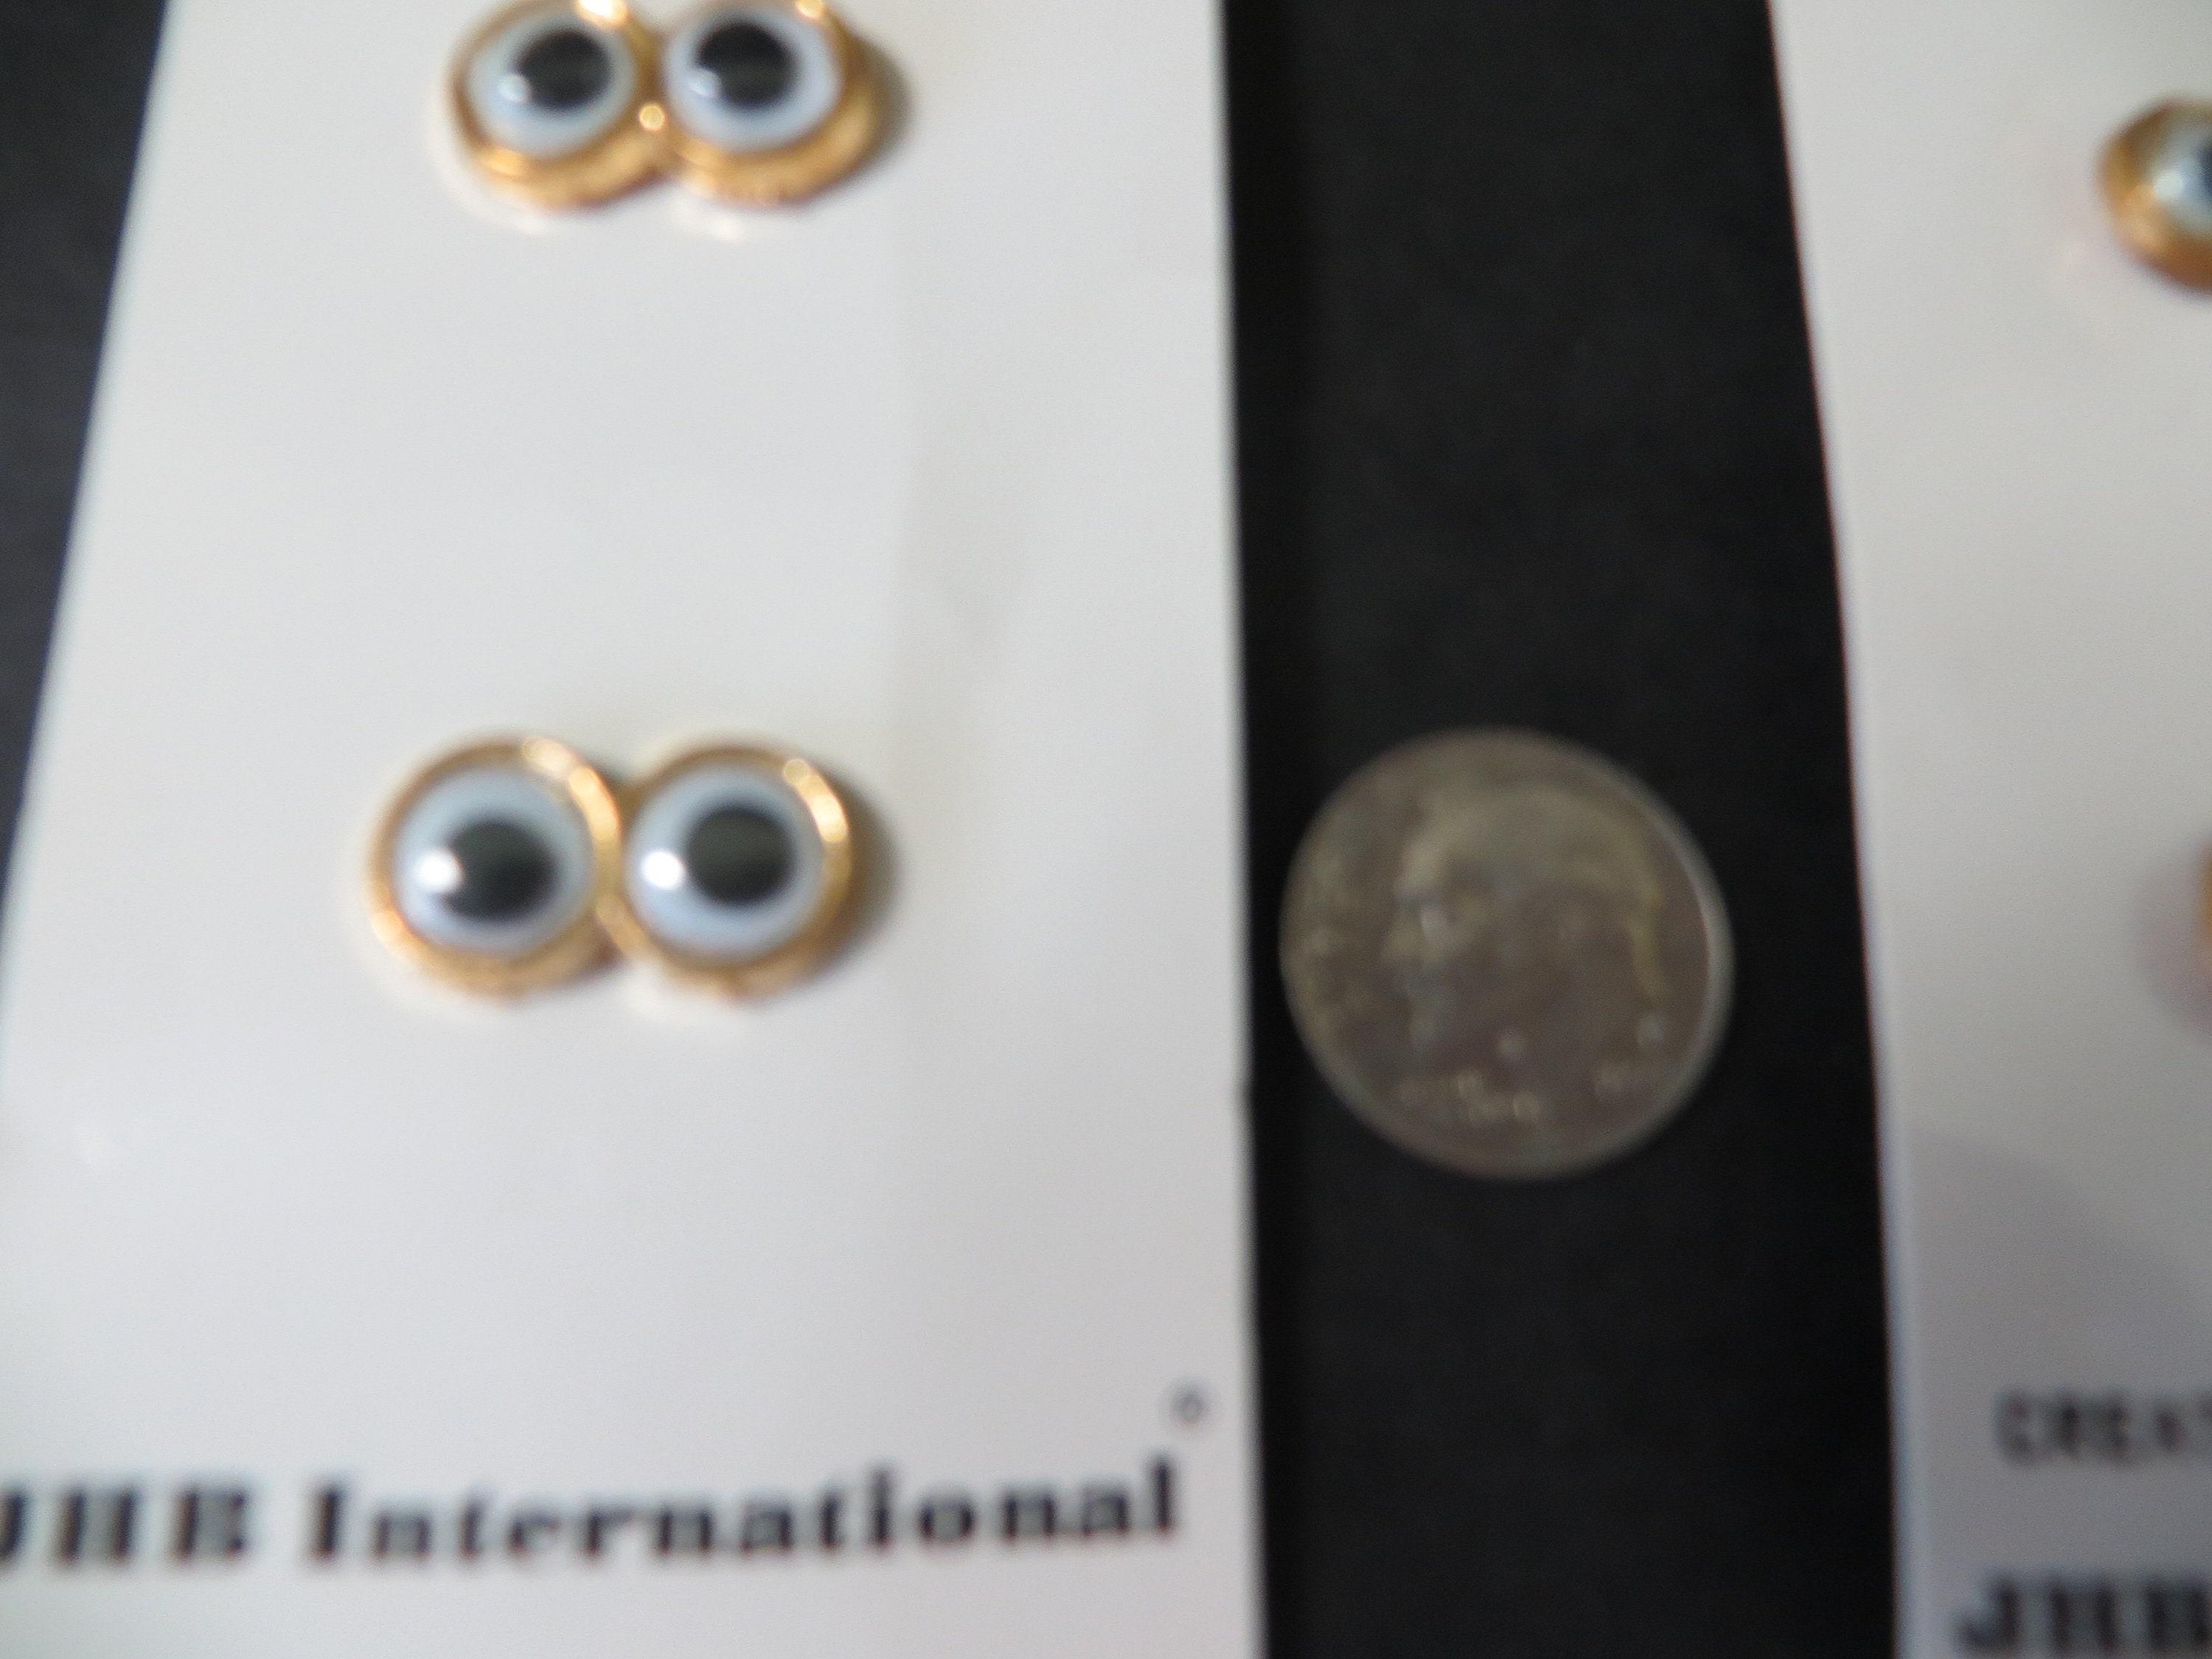 Twin Eyes Creative Buttons by JHB International 6 Buttons Total